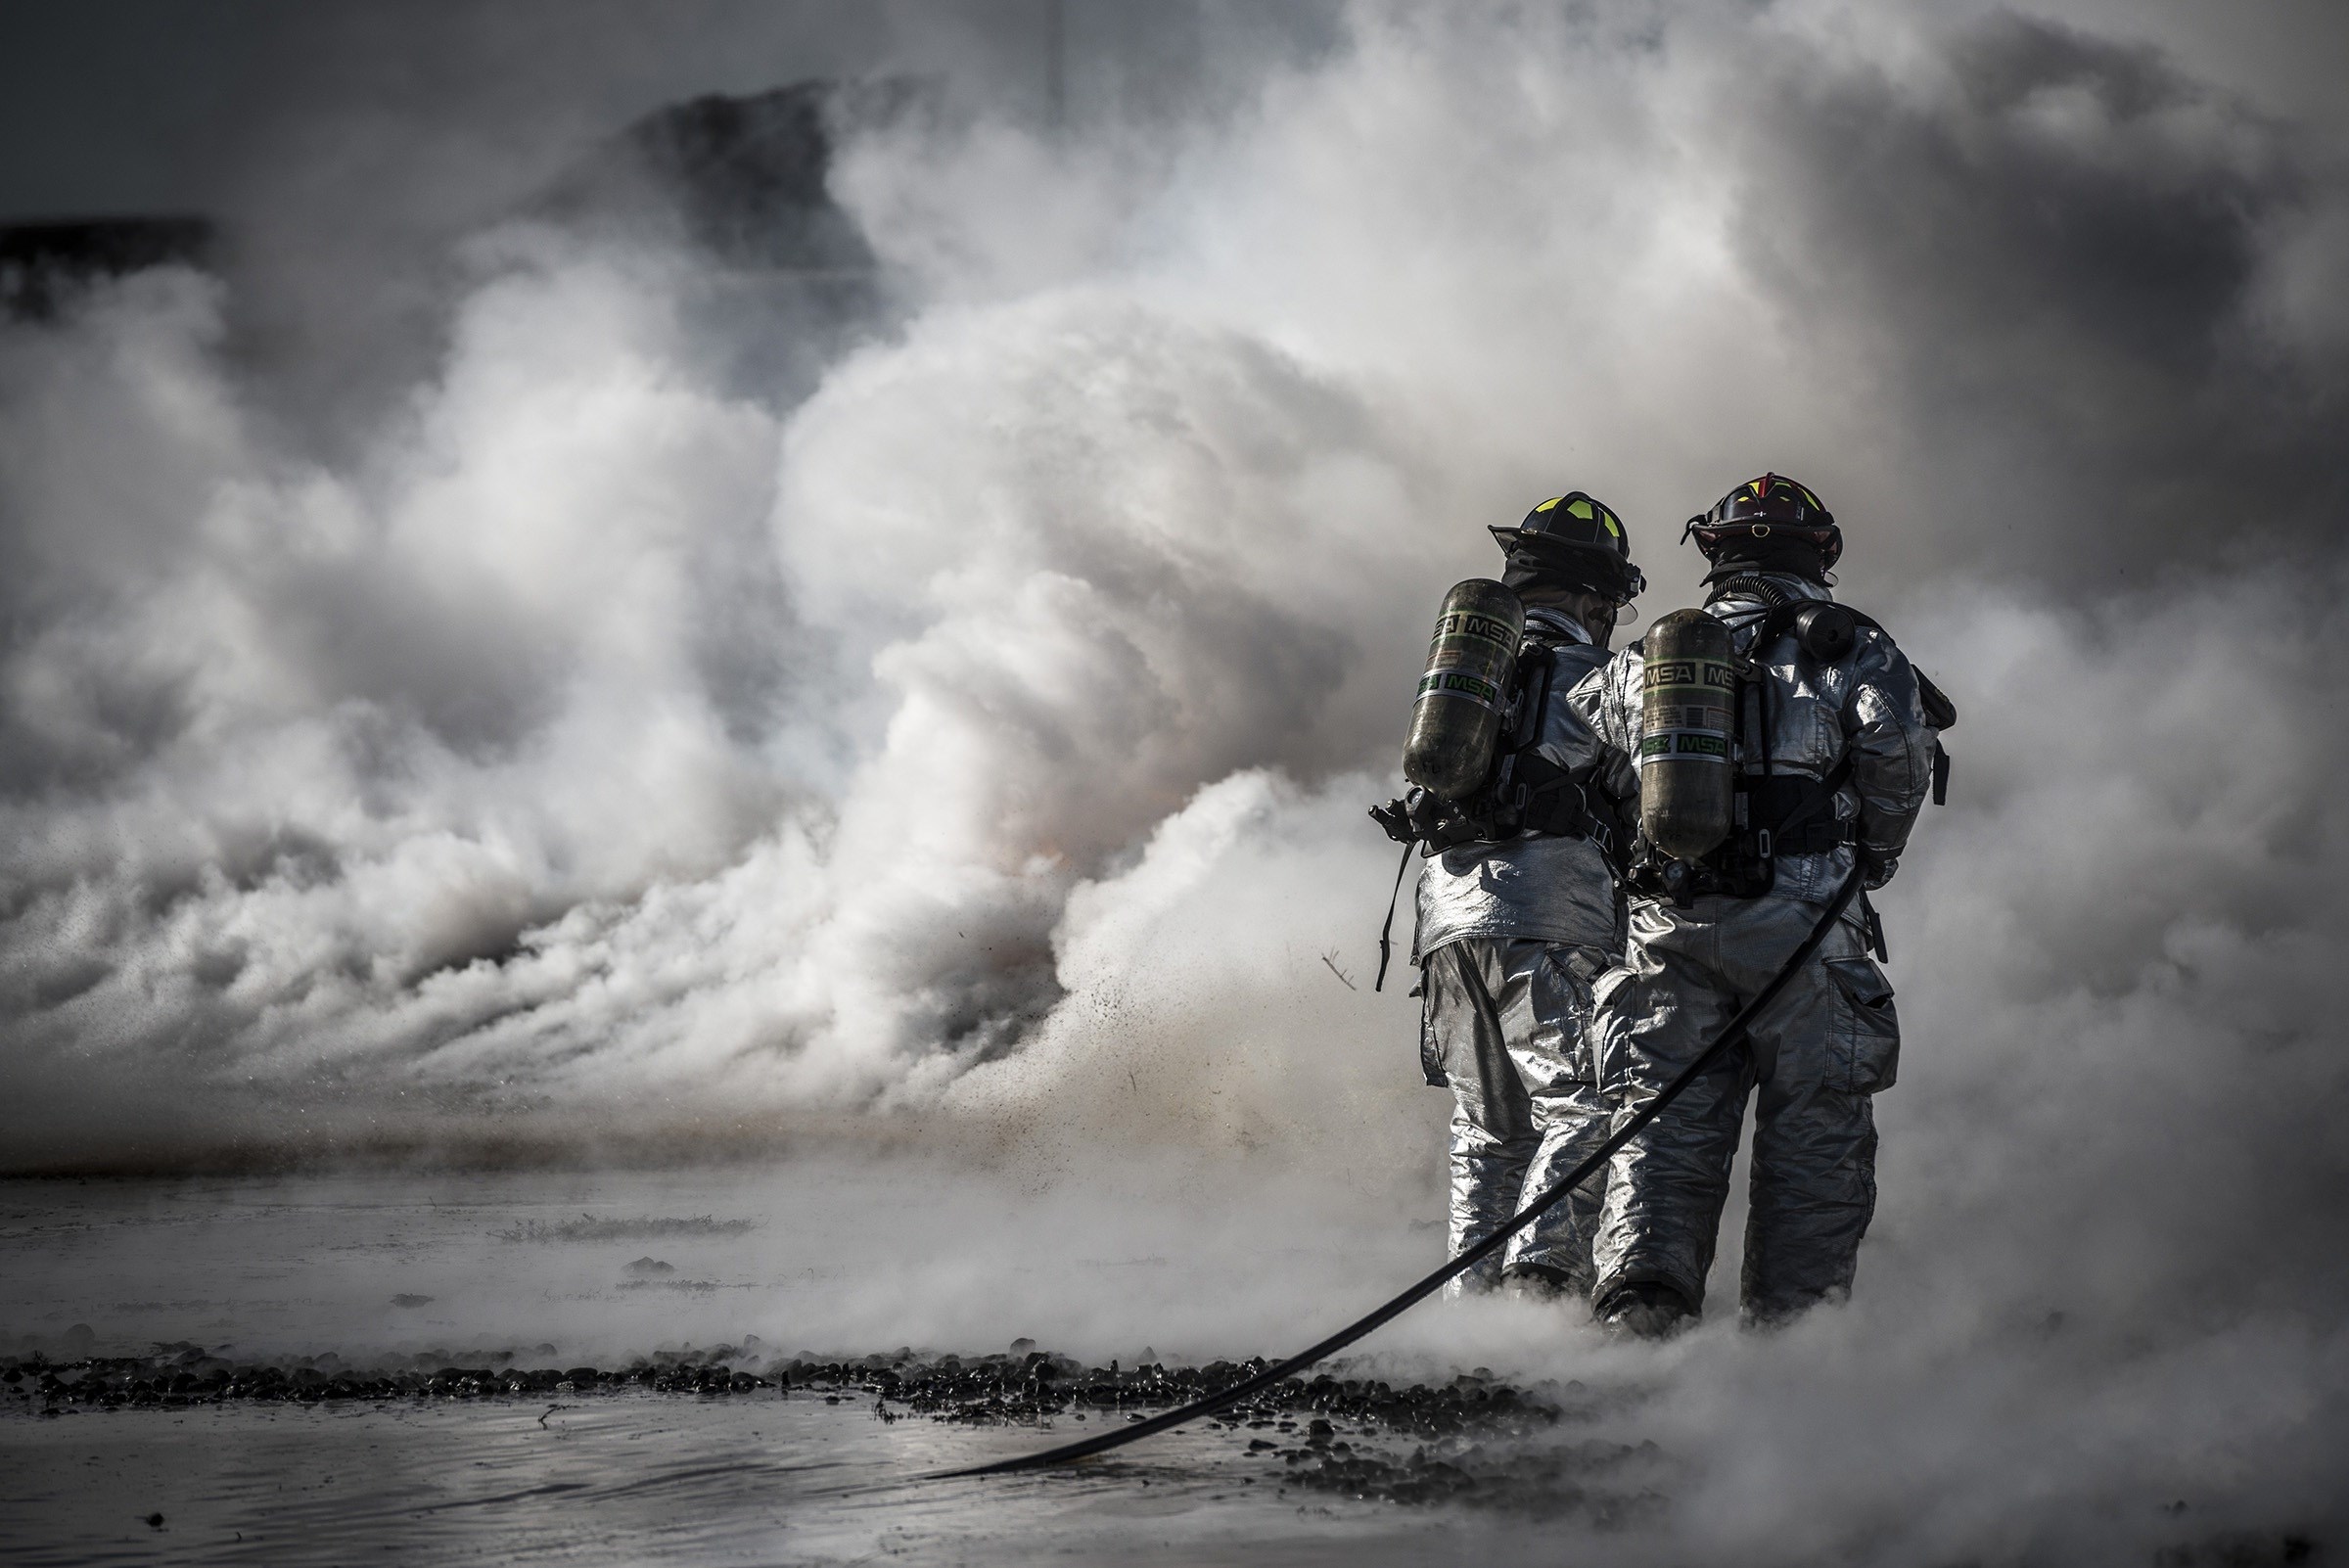 Firefighter hd wallpapers backgrounds